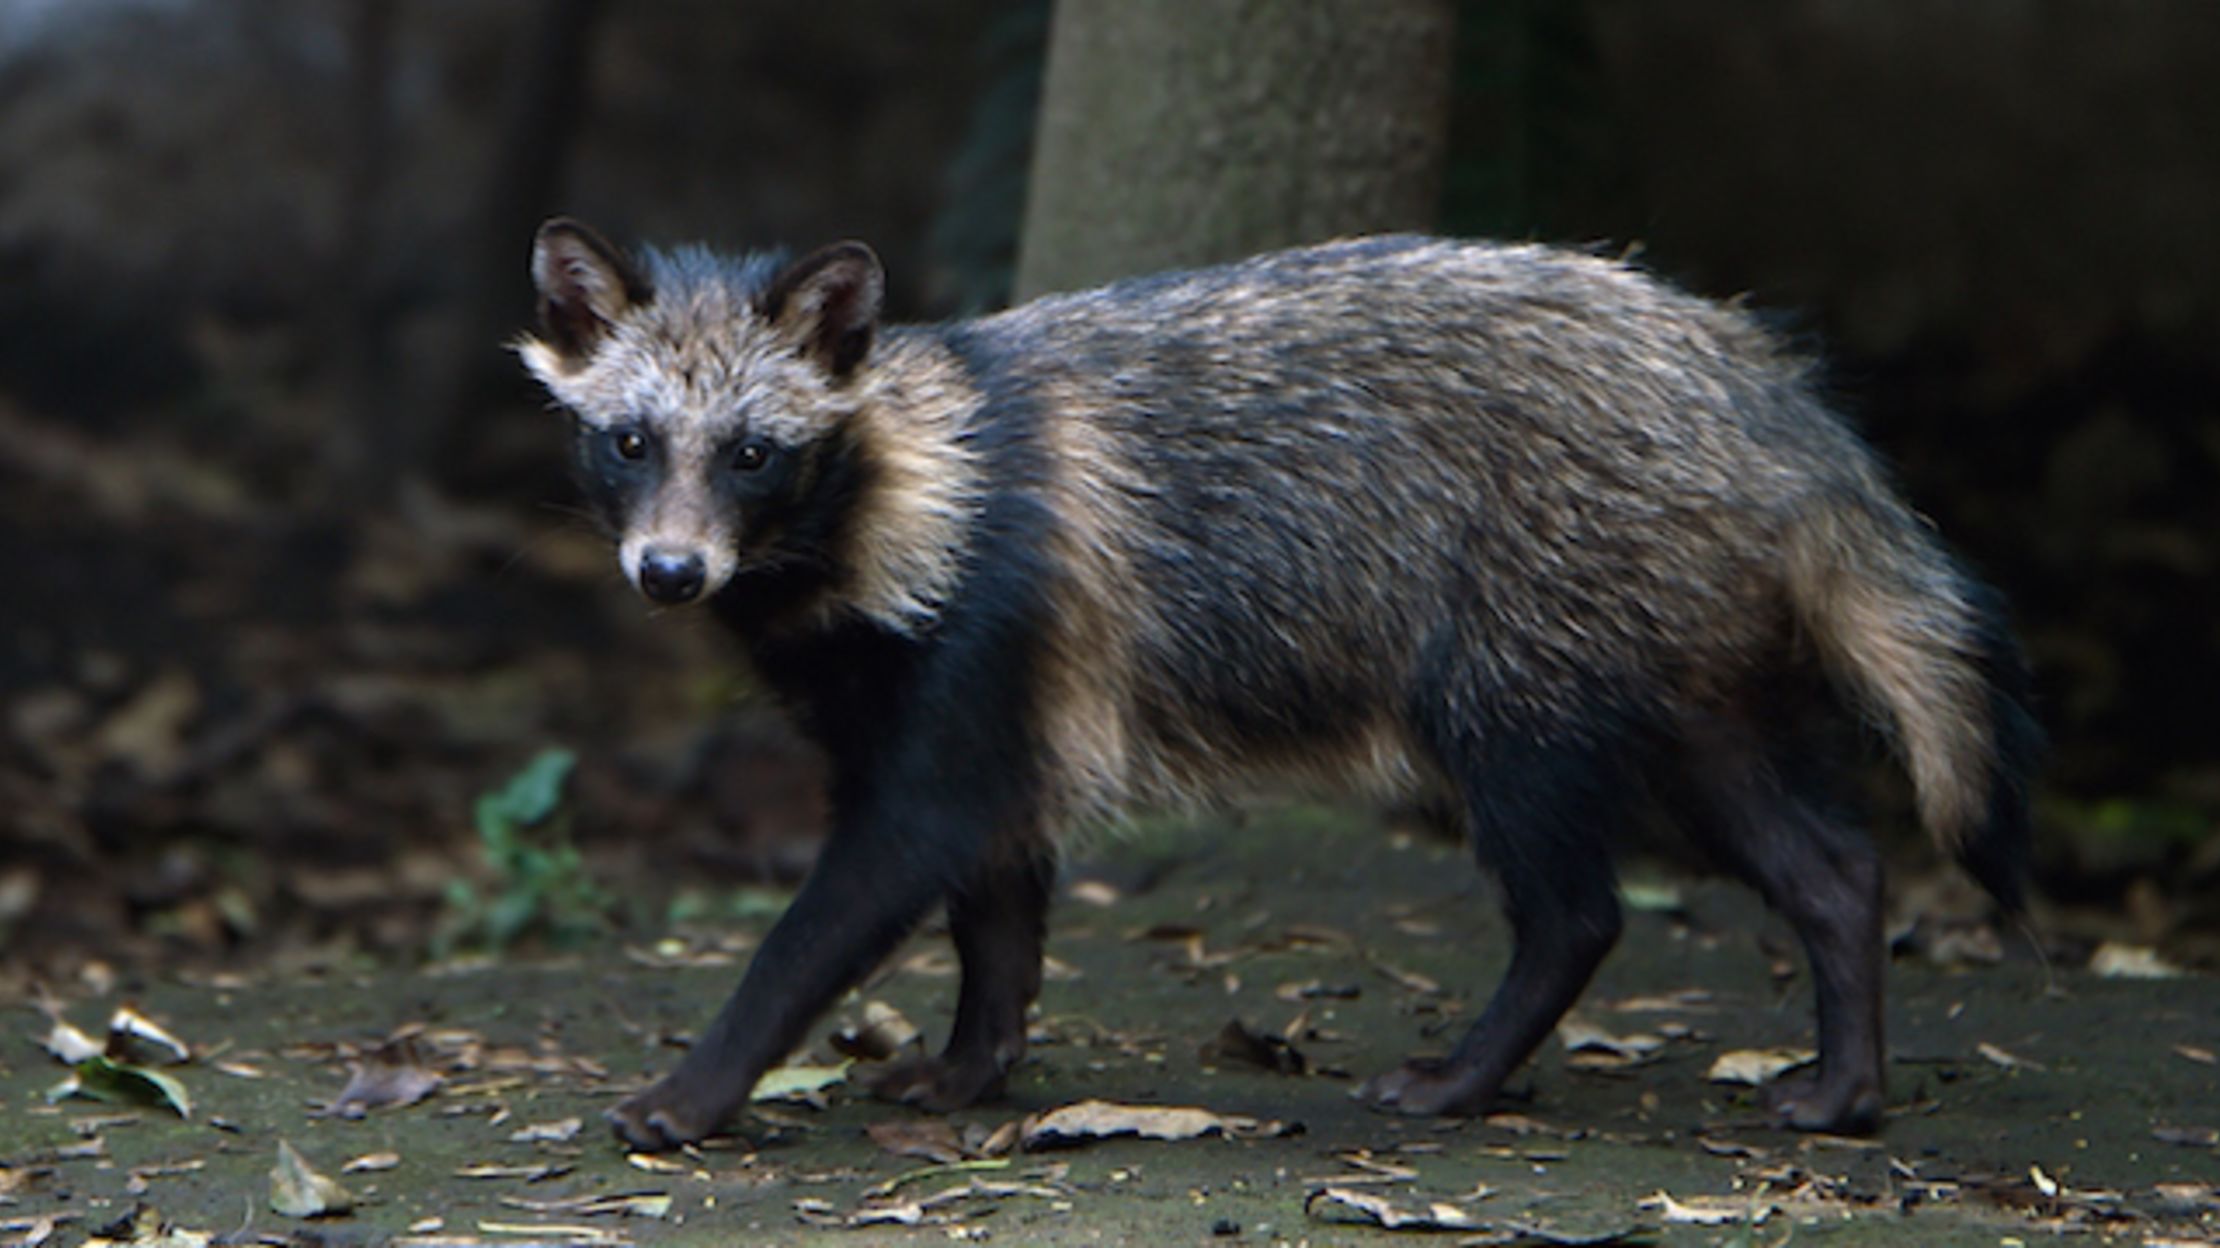 Not a Joke: “New Evidence” that Was Actually Obtained in Early 2020 Suggests “Raccoon Dogs” Responsible for COVID-19